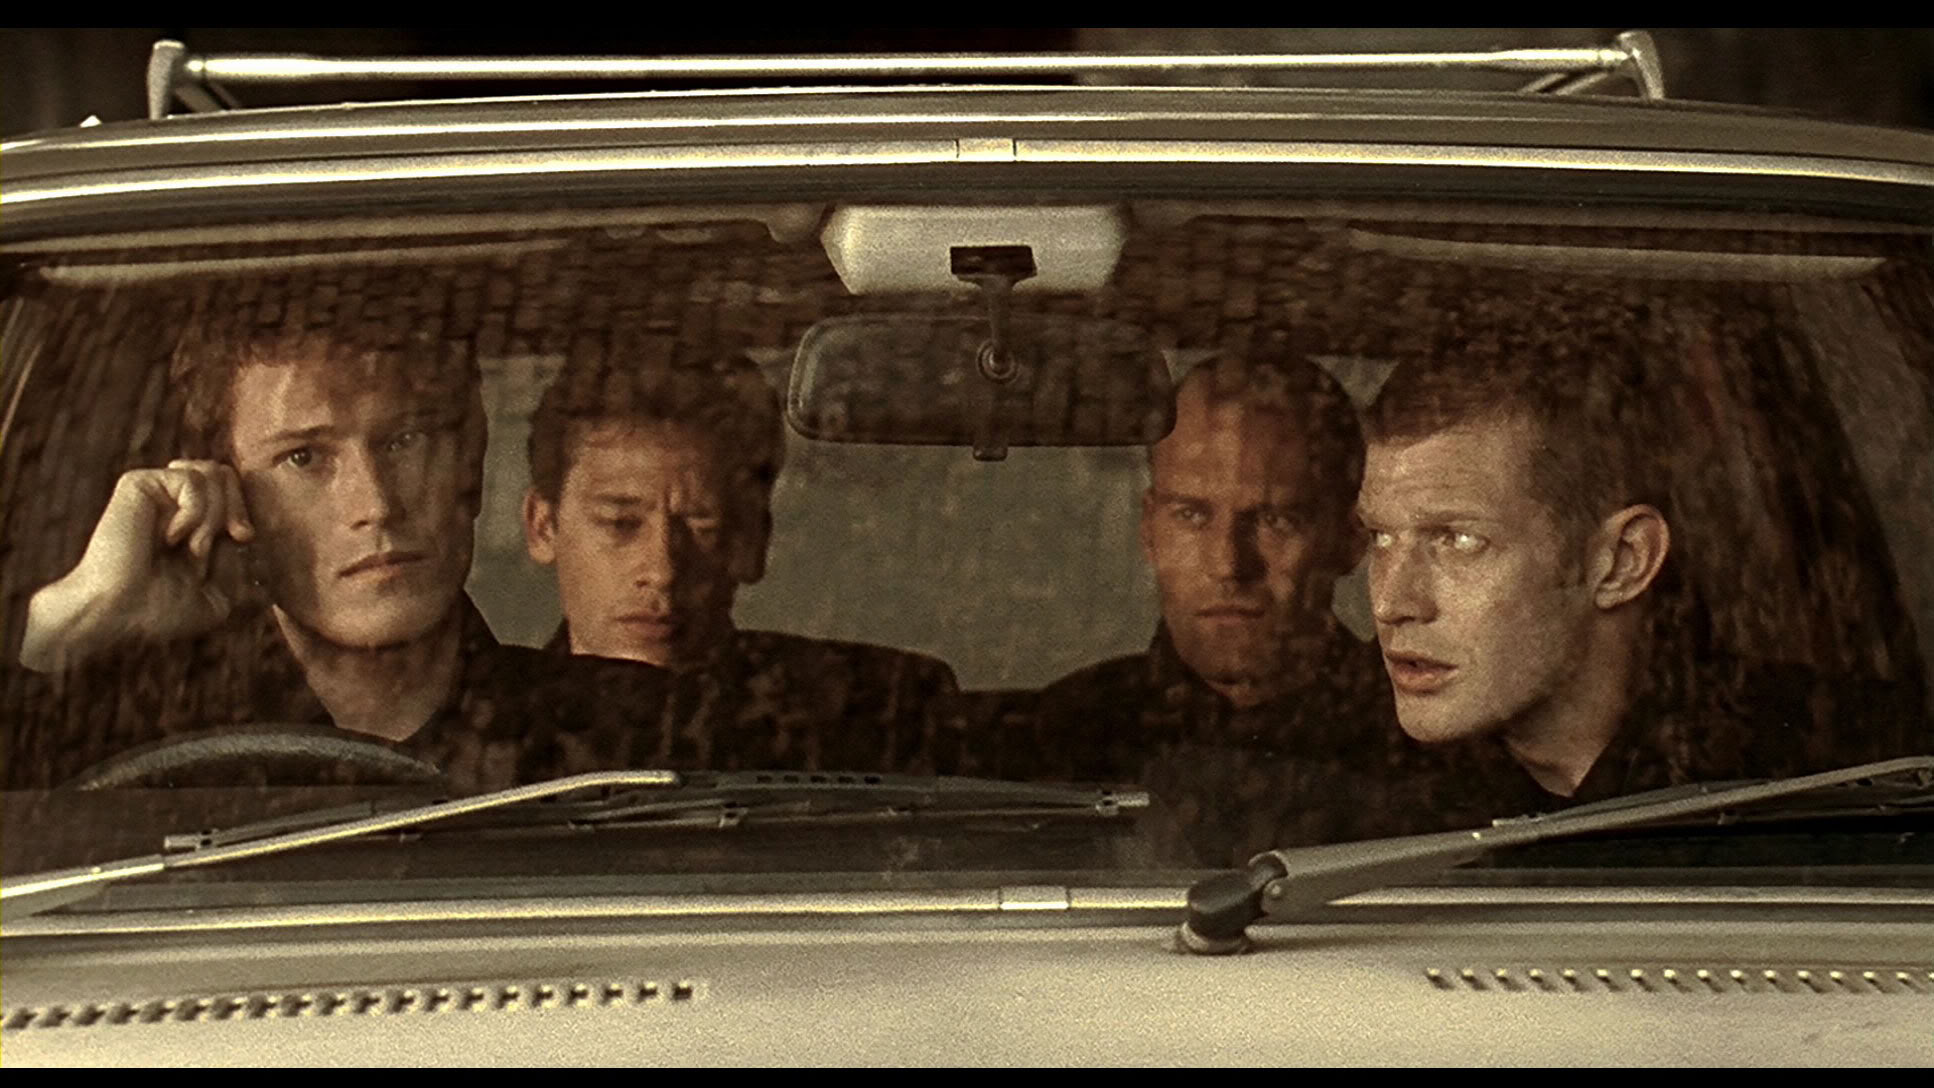 Lock, Stock And Two Smoking Barrels #4